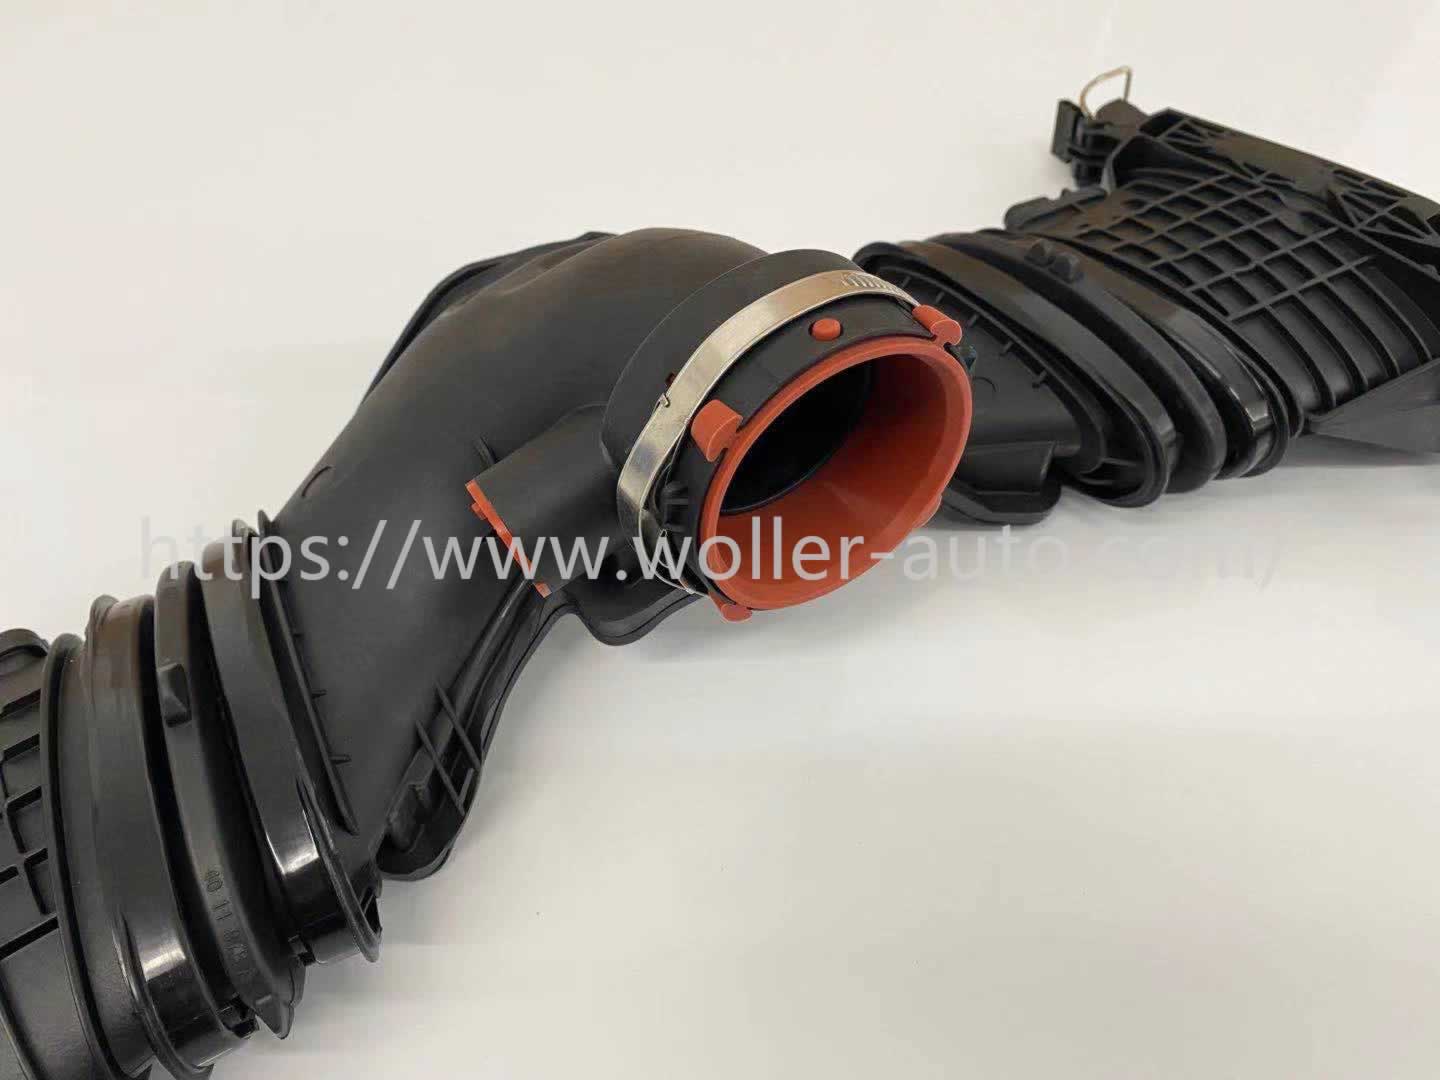 Engine Intake Duct With Air Mass Sensor 6420901642 6420901742 A6420900048 A6420901742 A6420901642 For Mercedes OM642 W166